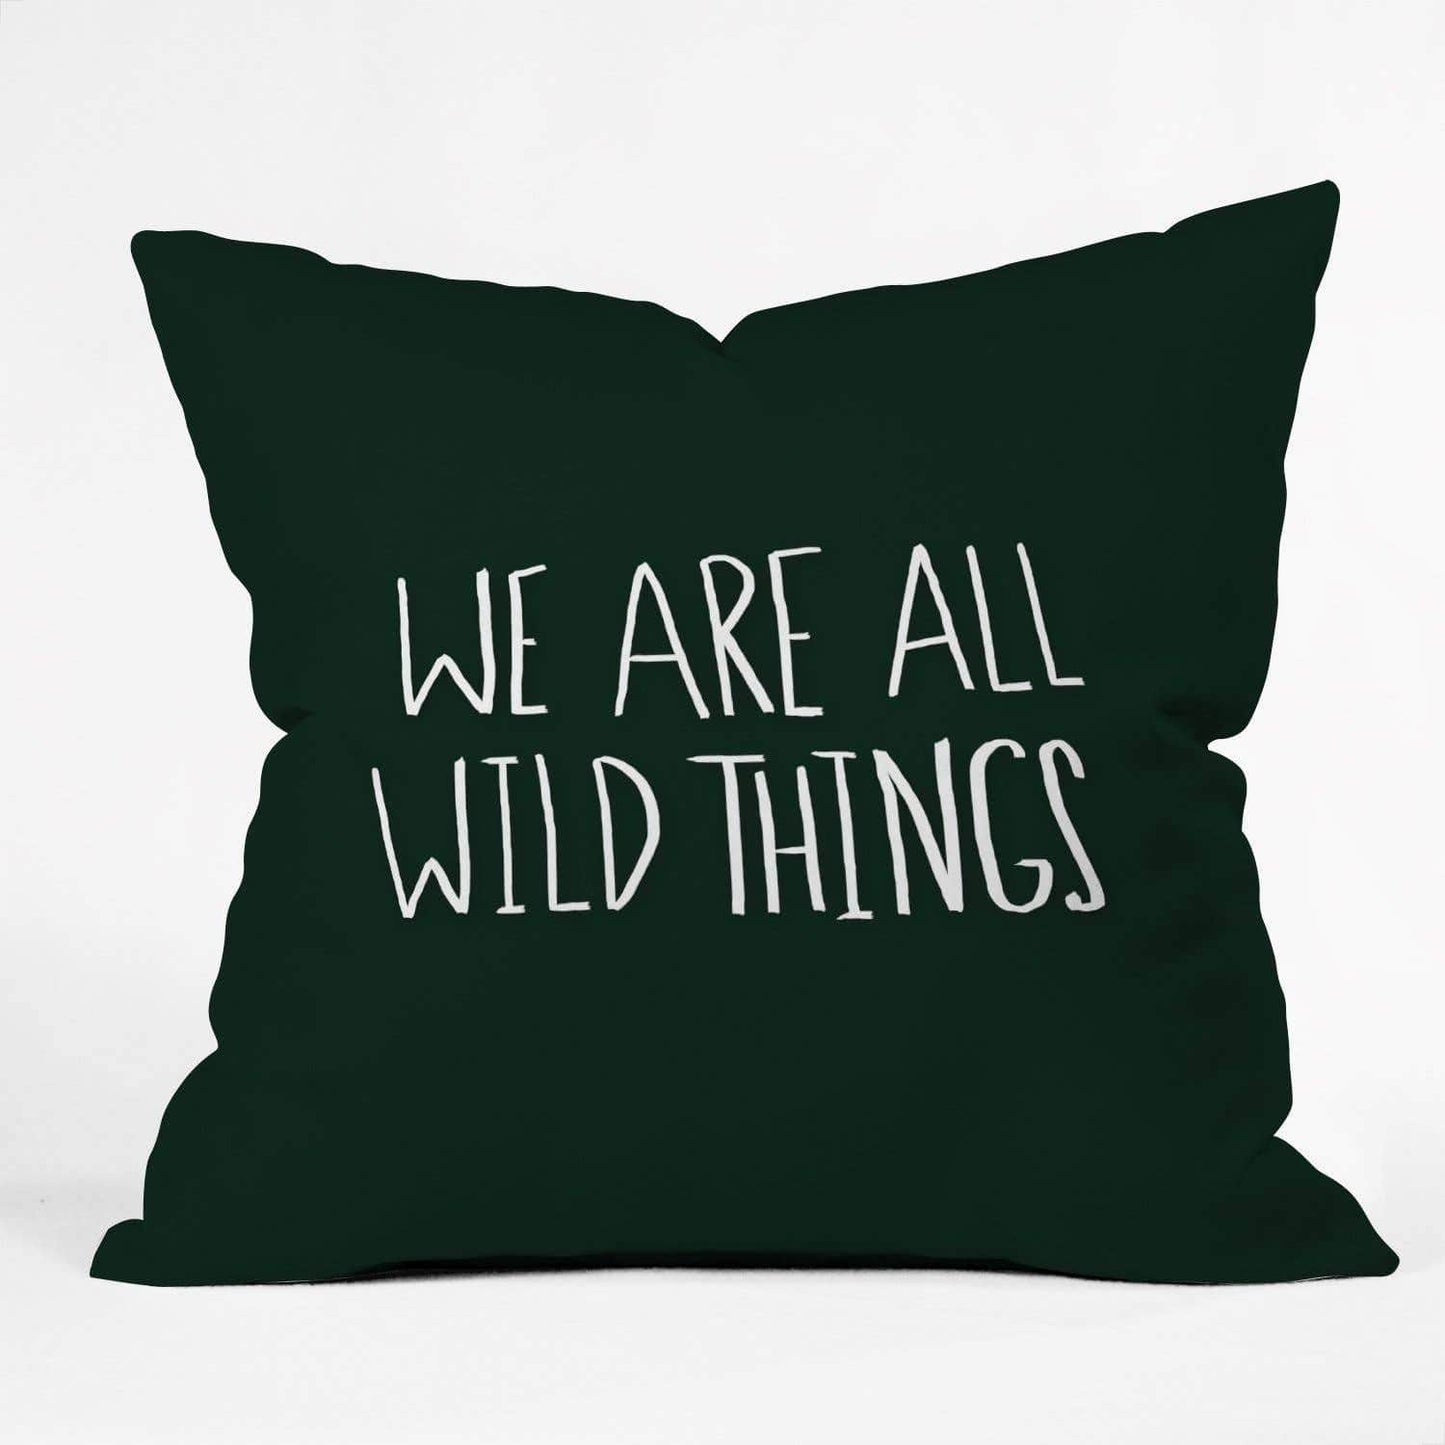 We Are All Wild Things Throw Pillow